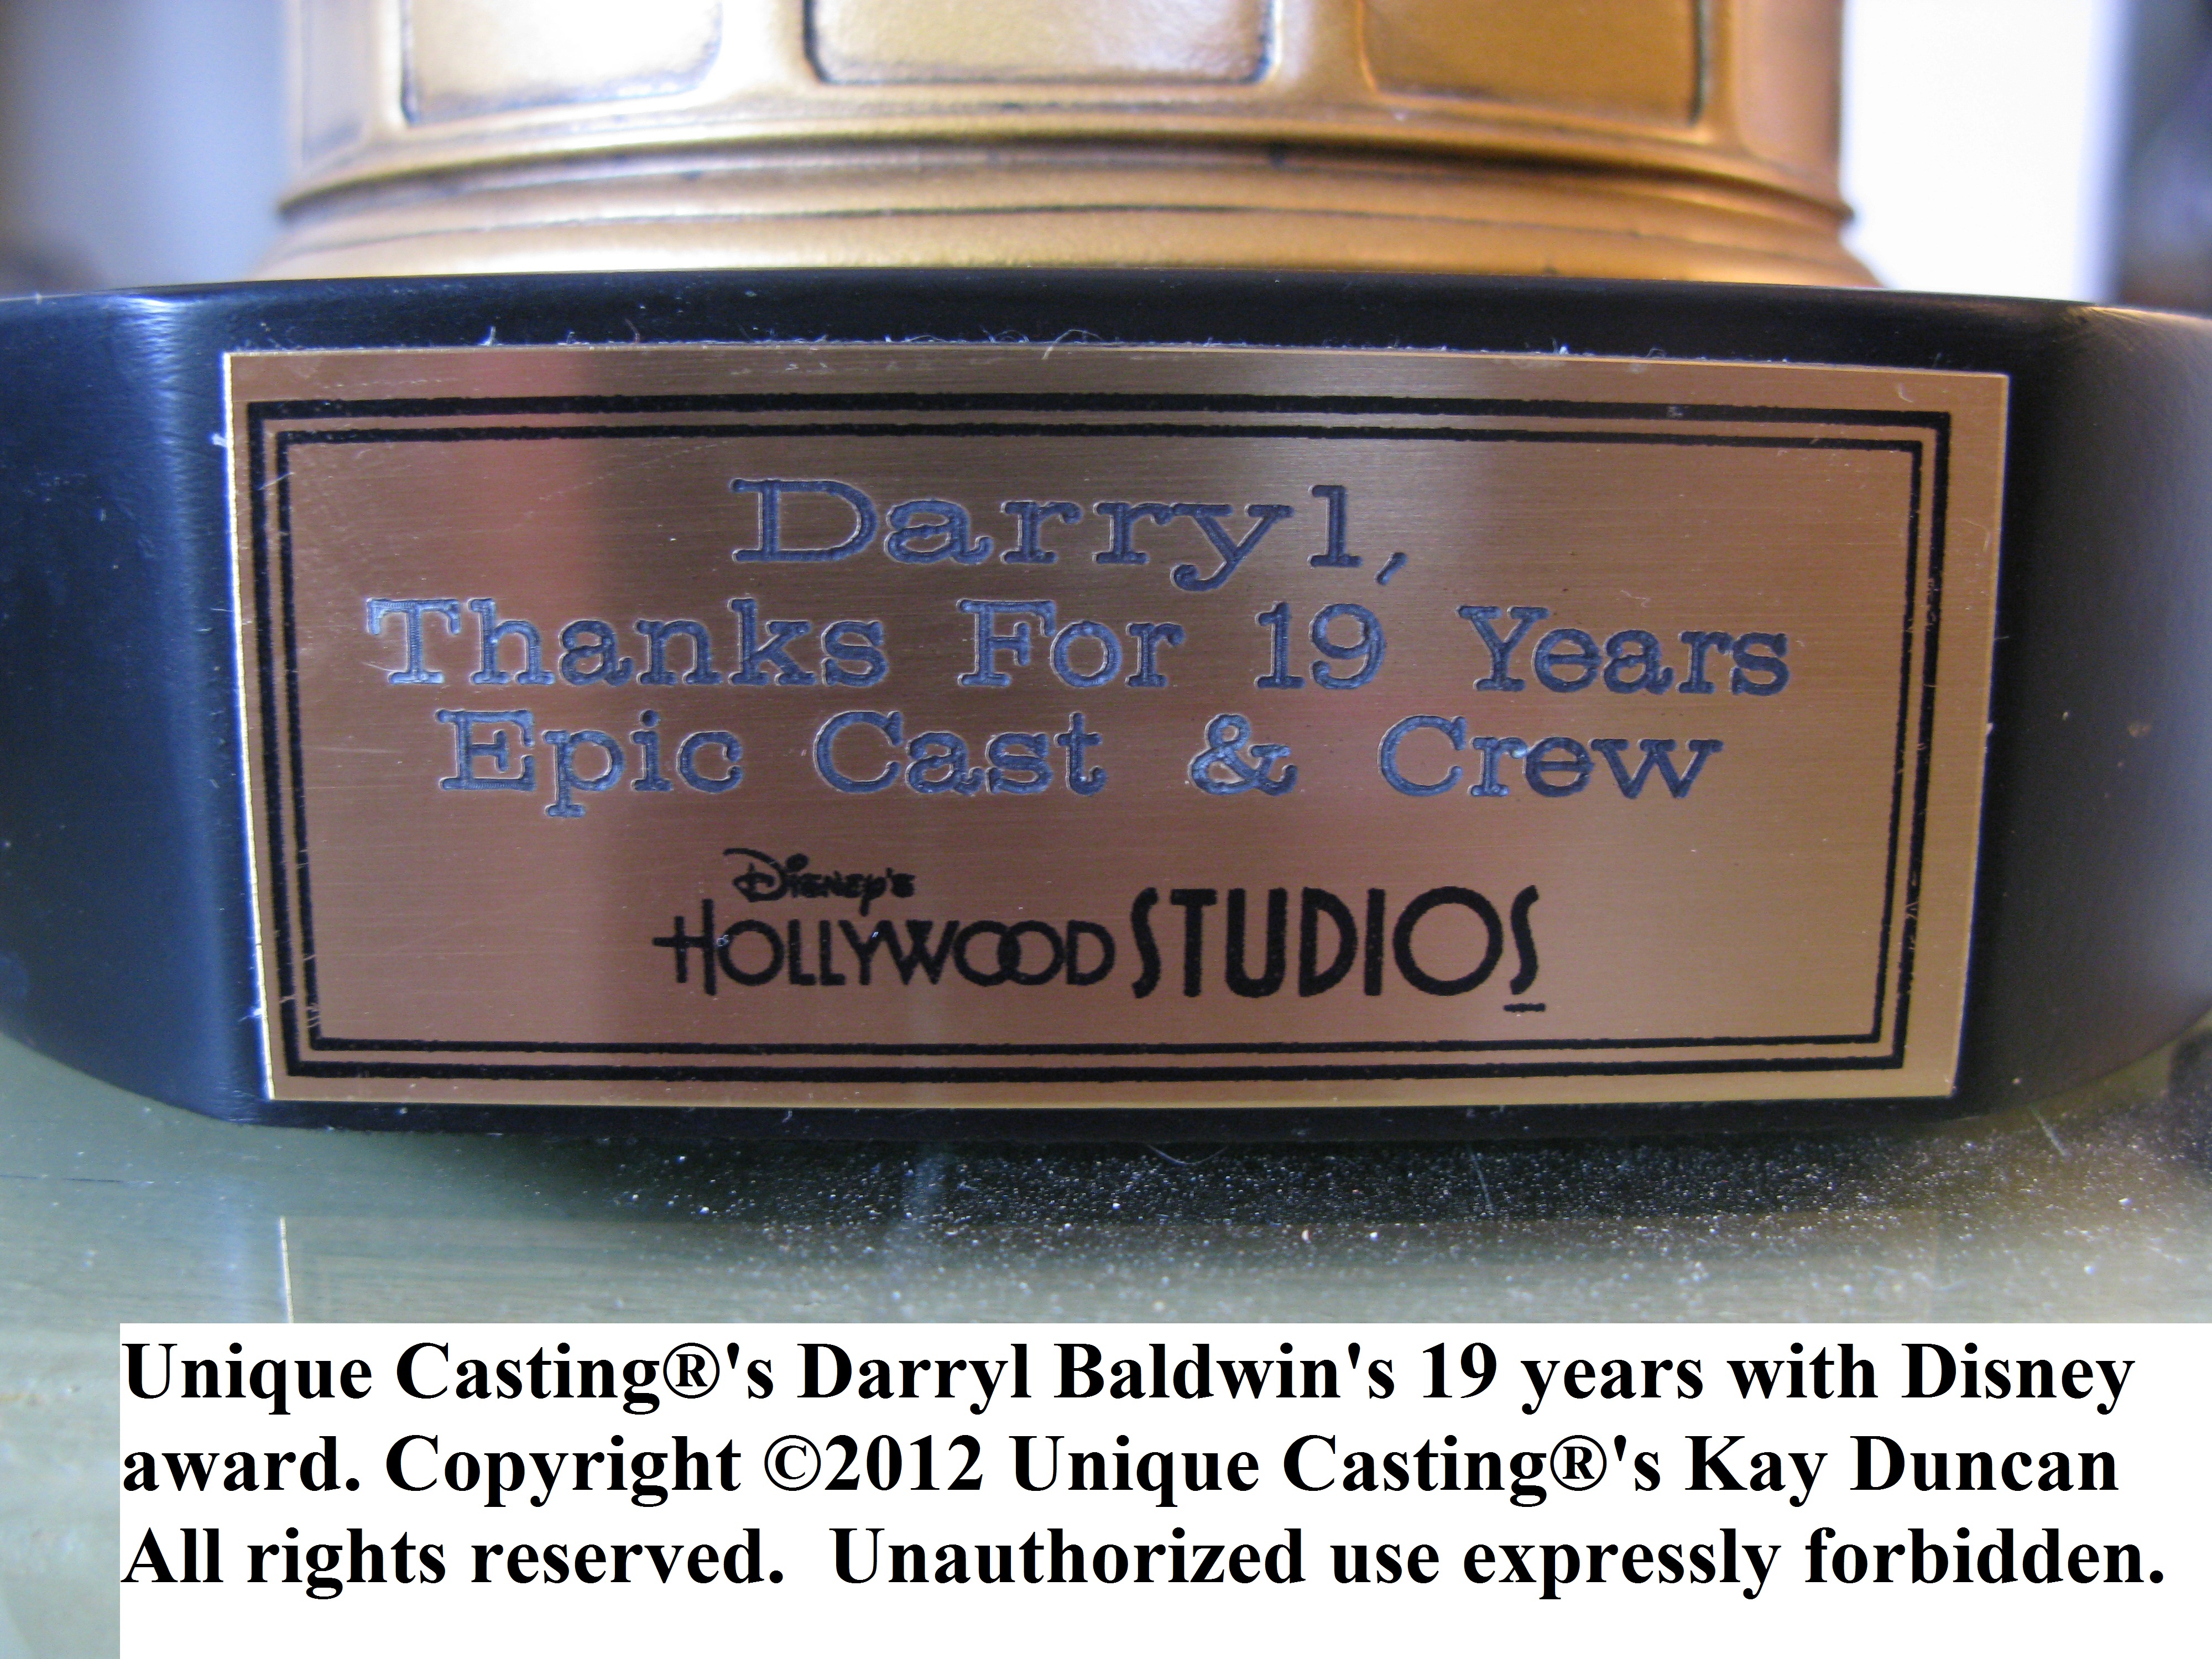 Unique Casting®'s Darryl Baldwin's 19 years with Disney award. Copyright ©2012 Unique Casting®'s Kay Duncan All rights reserved. Unauthorized use expressly forbidden.